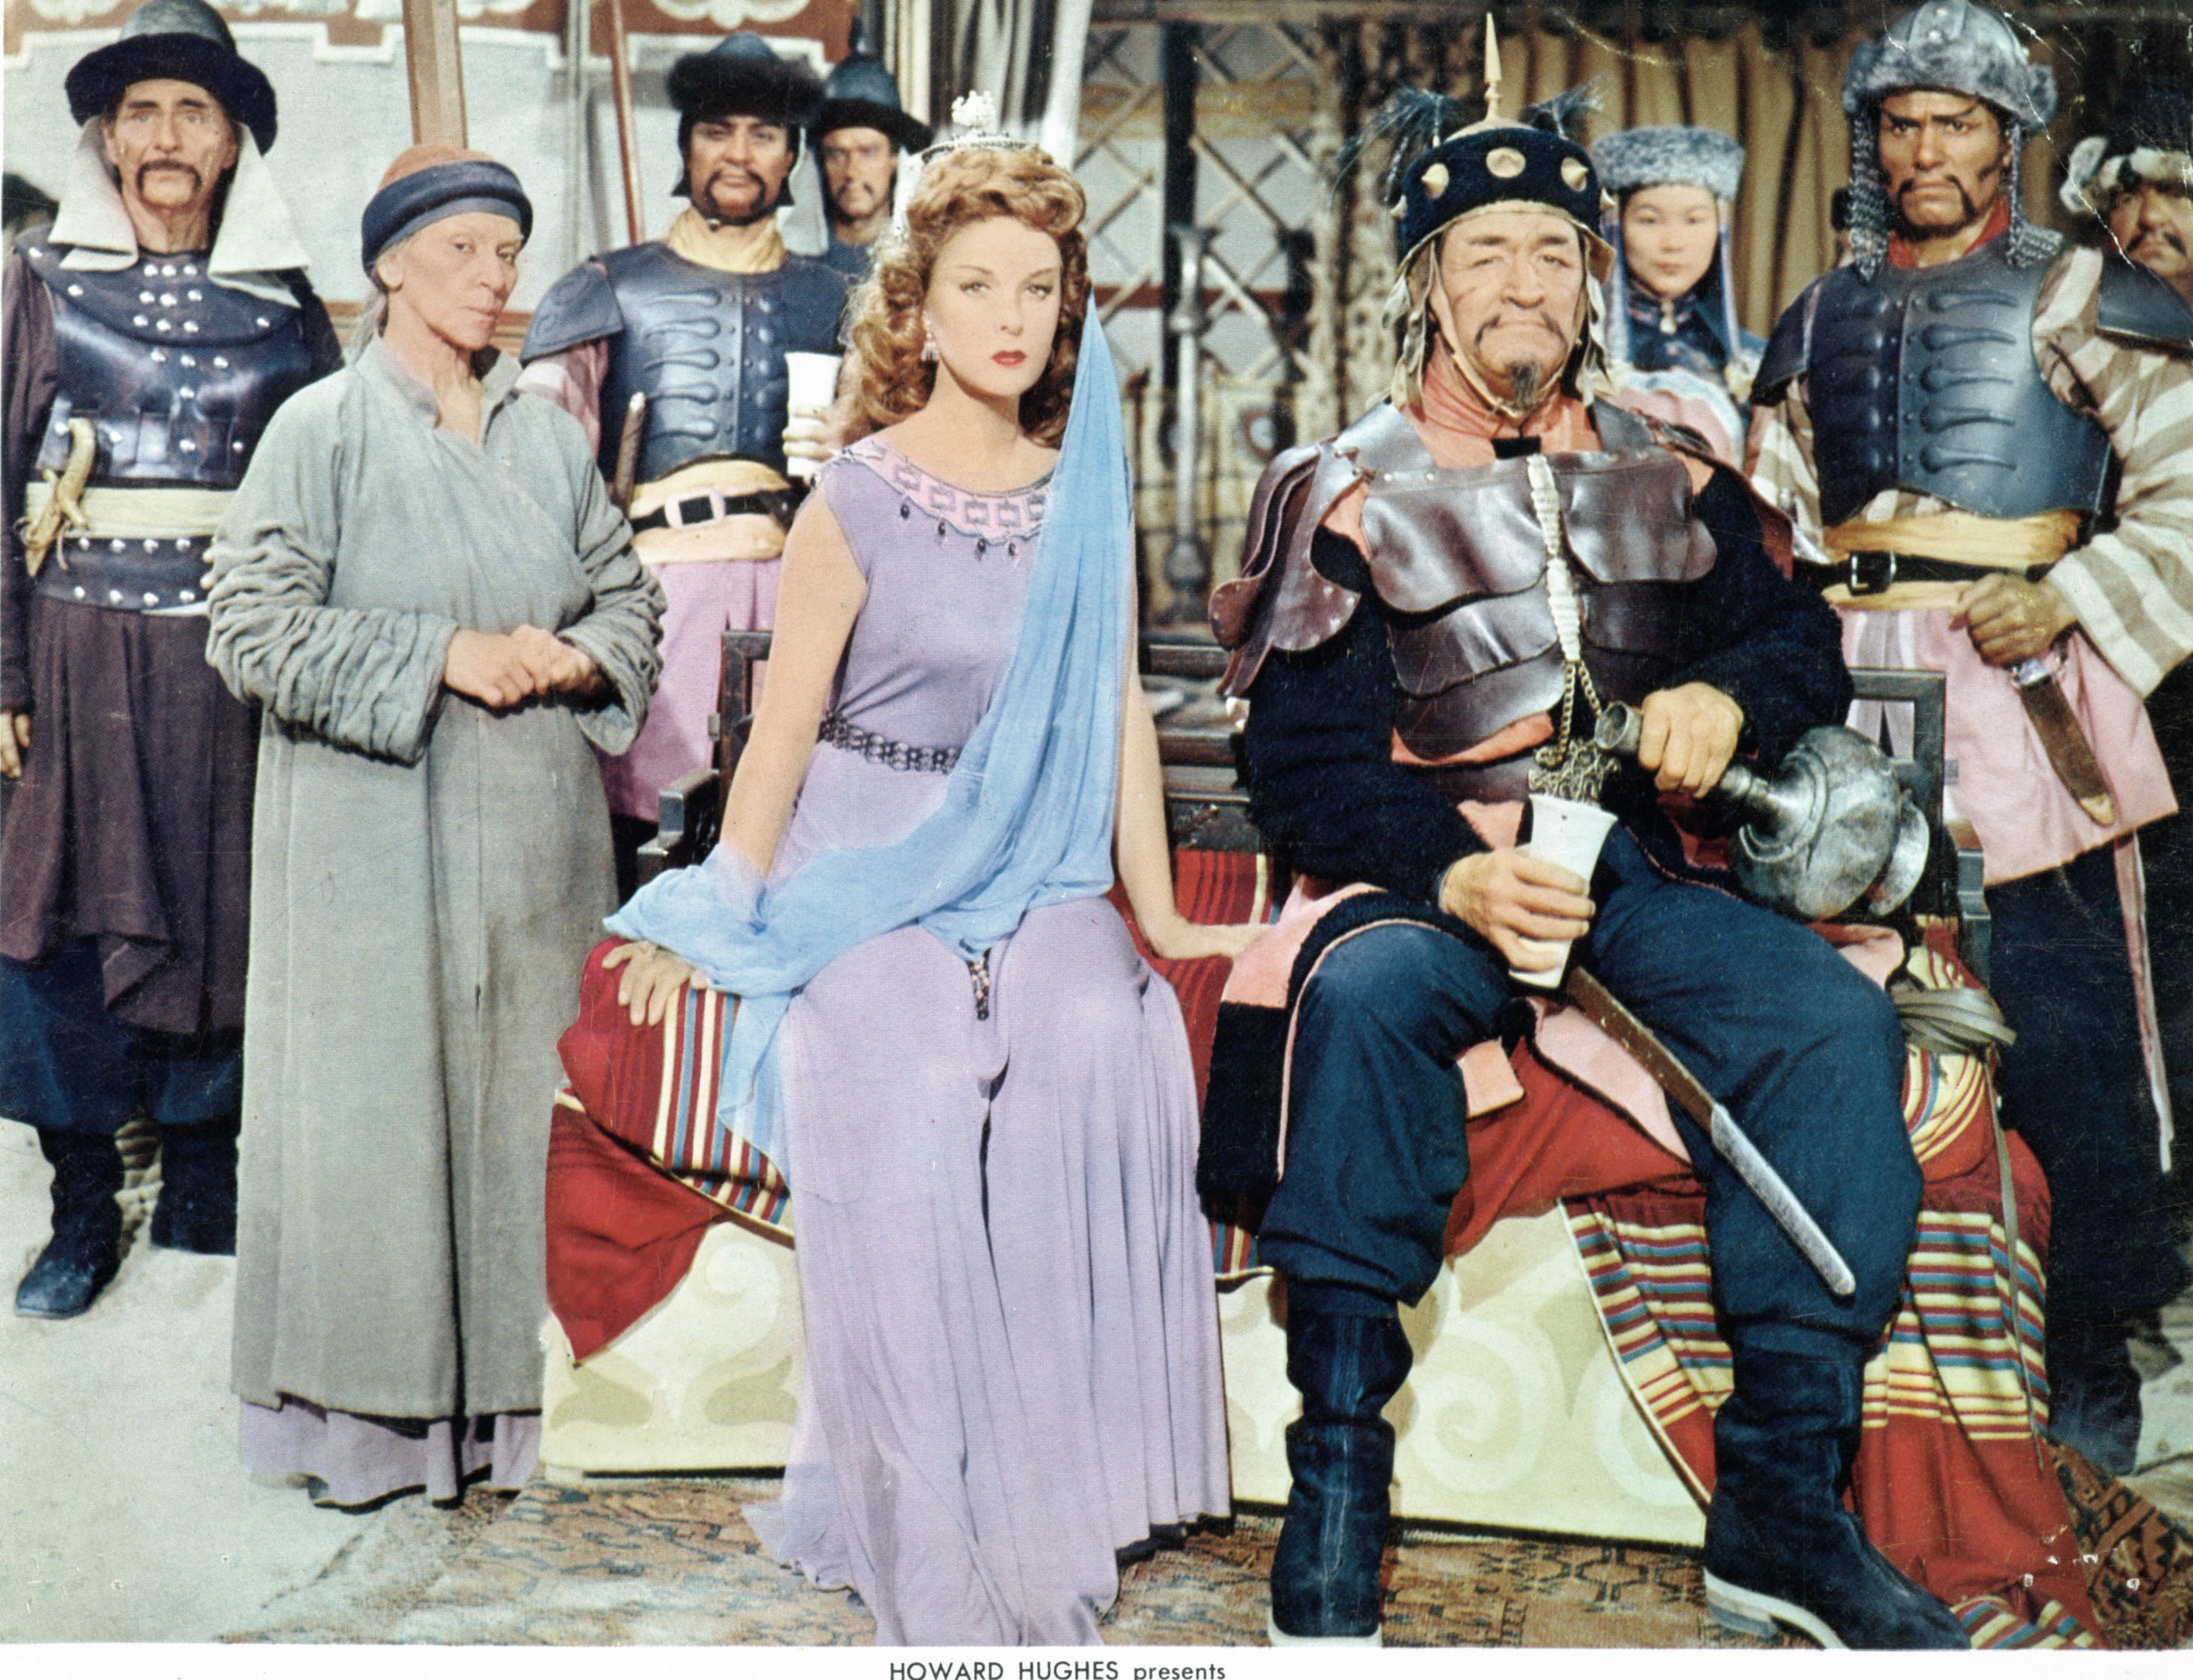 Susan Hayward and John Wayne sitting together surrounded by unidentified actors in a scene from the film &#x27;The Conqueror&#x27;